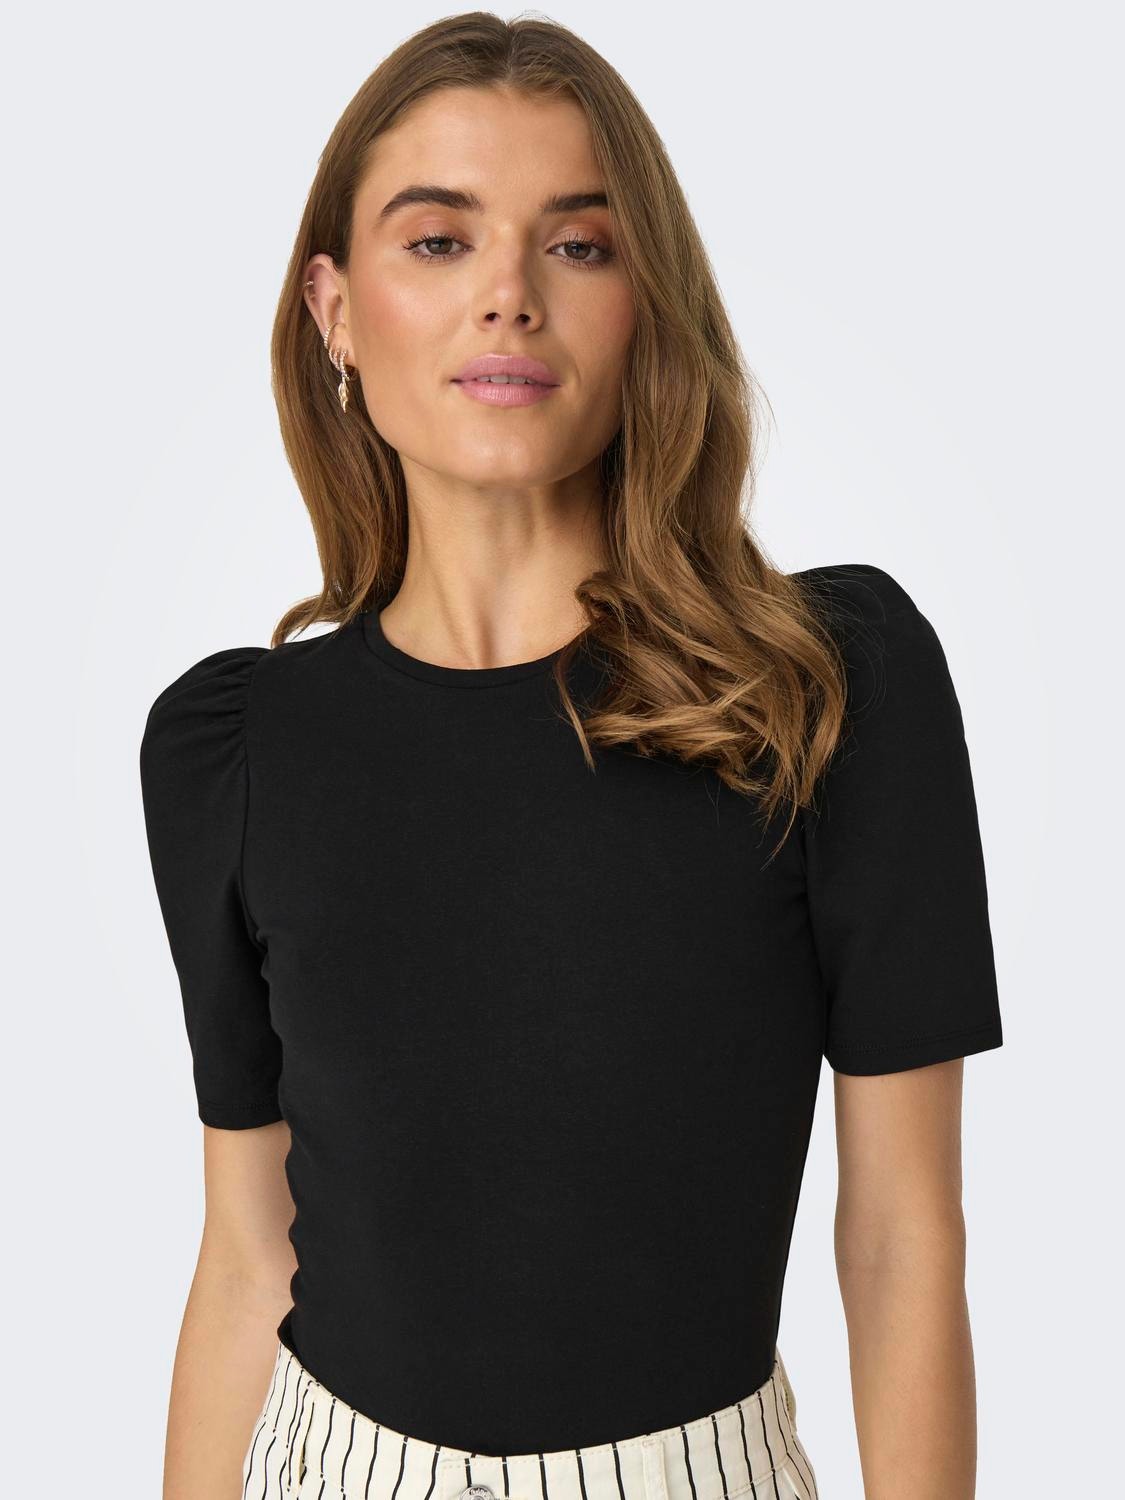 ONLY o-neck top -Black - 15282484